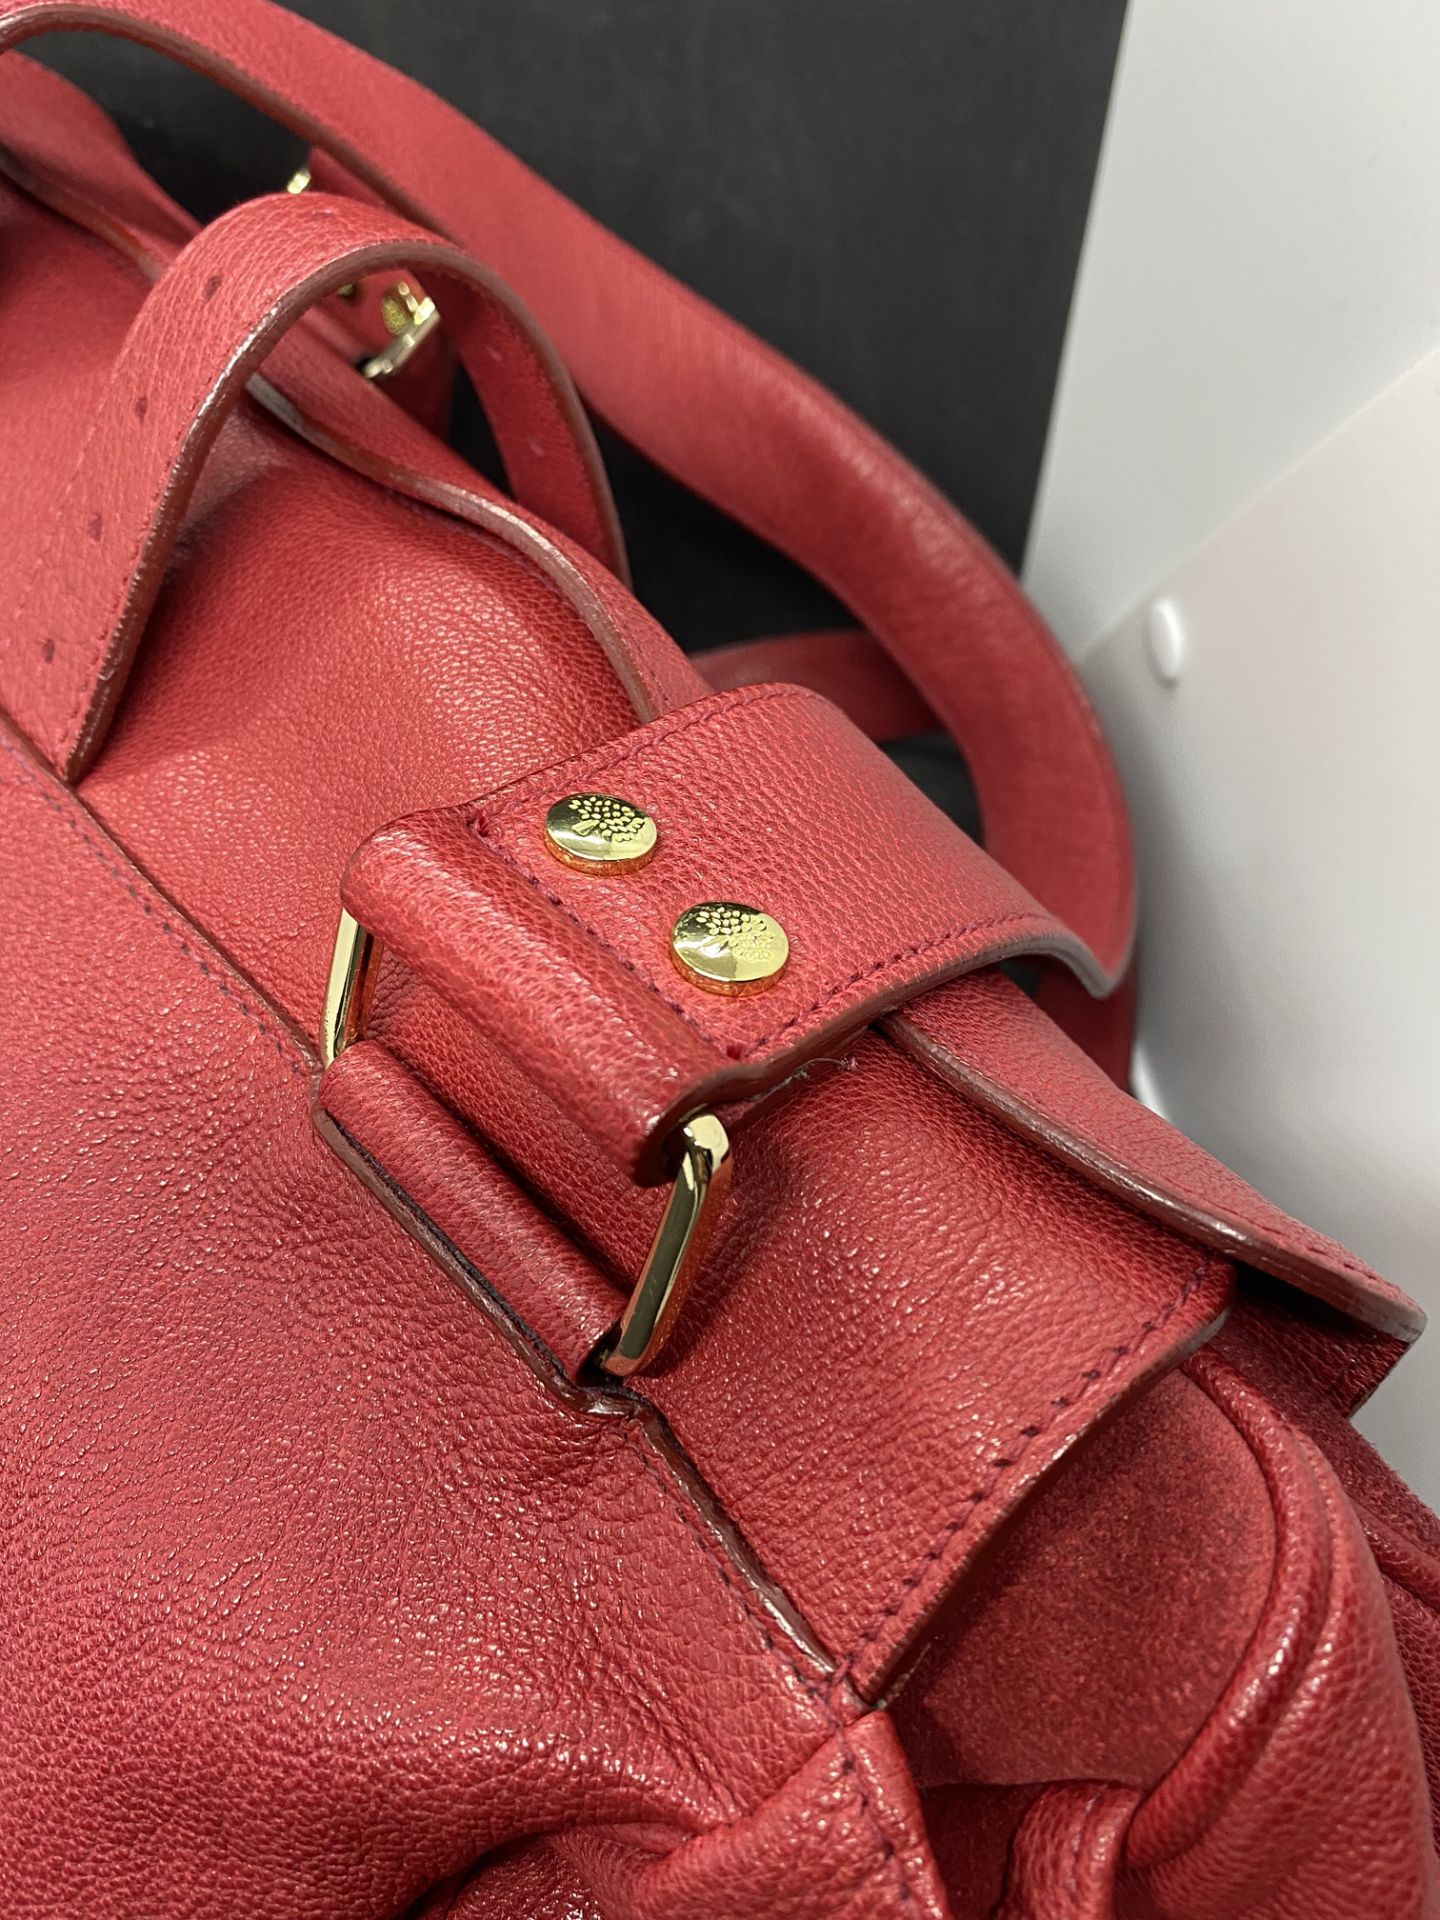 RED MULBERRY HANDBAG WITH DUSTBAG - Image 11 of 16